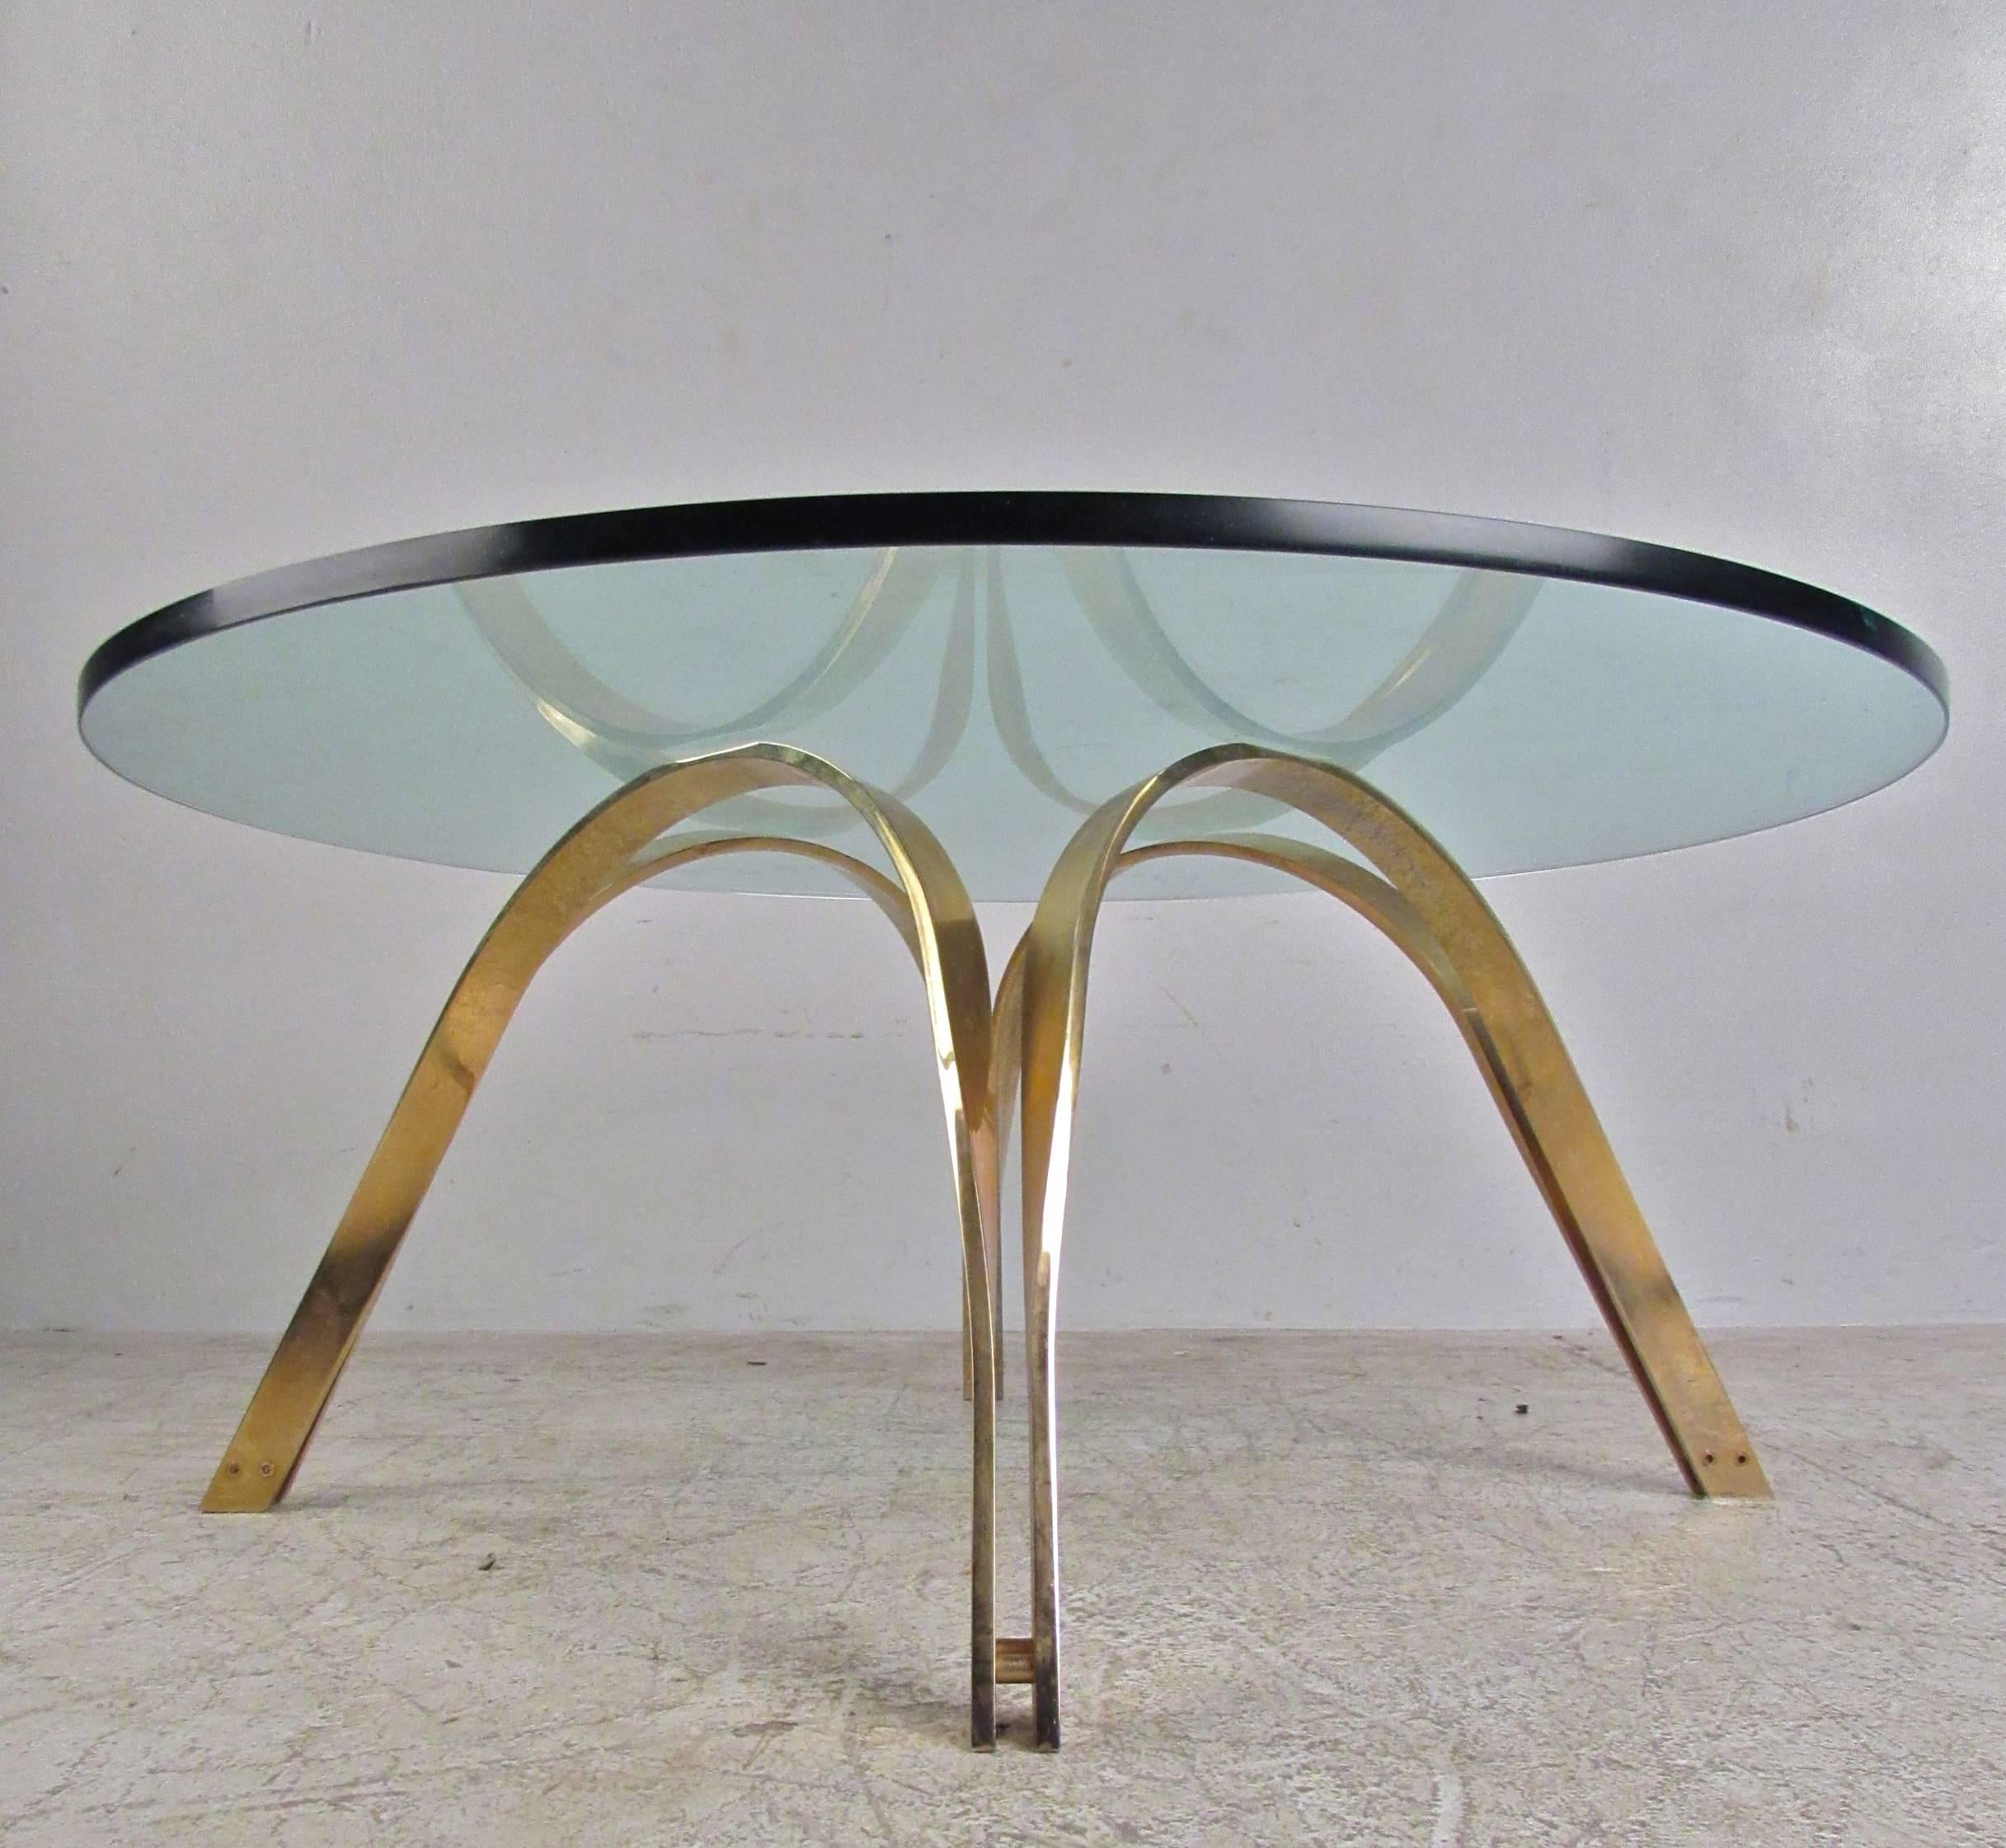 This unique 1960s coffee table features an elegant base that fits wonderfully with Mid-Century Modern decor. This Roger Sprunger design was originally crafted for Dunbar, and boasts a thick circular glass top, allowing it's clean and simple design